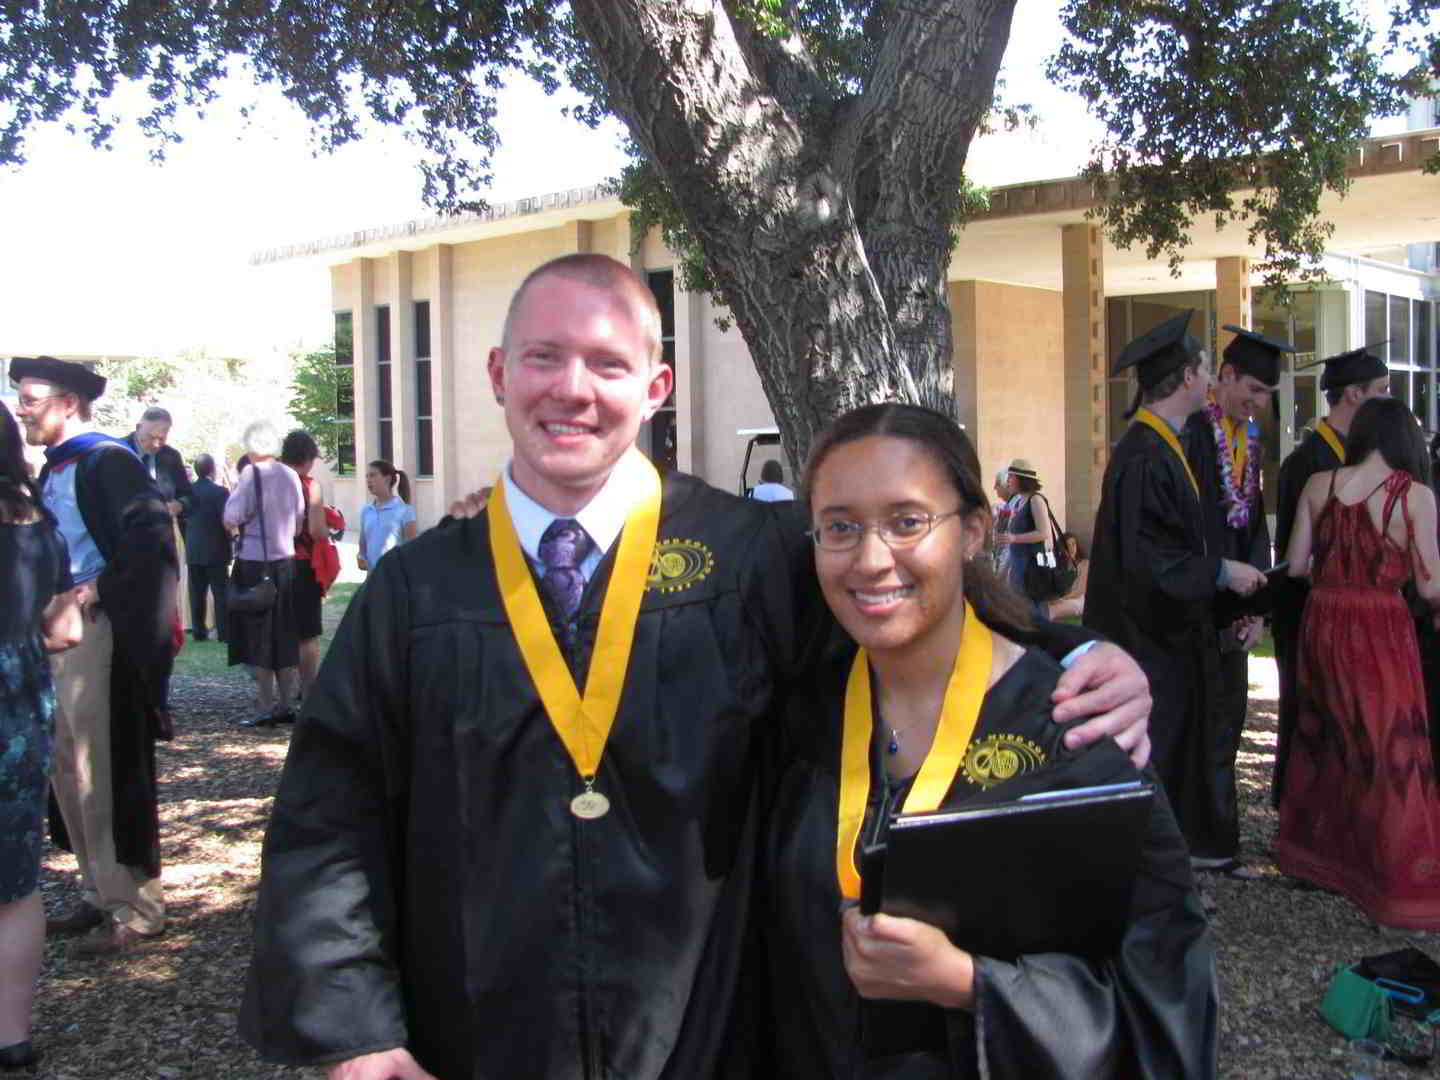 Chance and I at our graduation from Harvey Mudd College in May 2013.